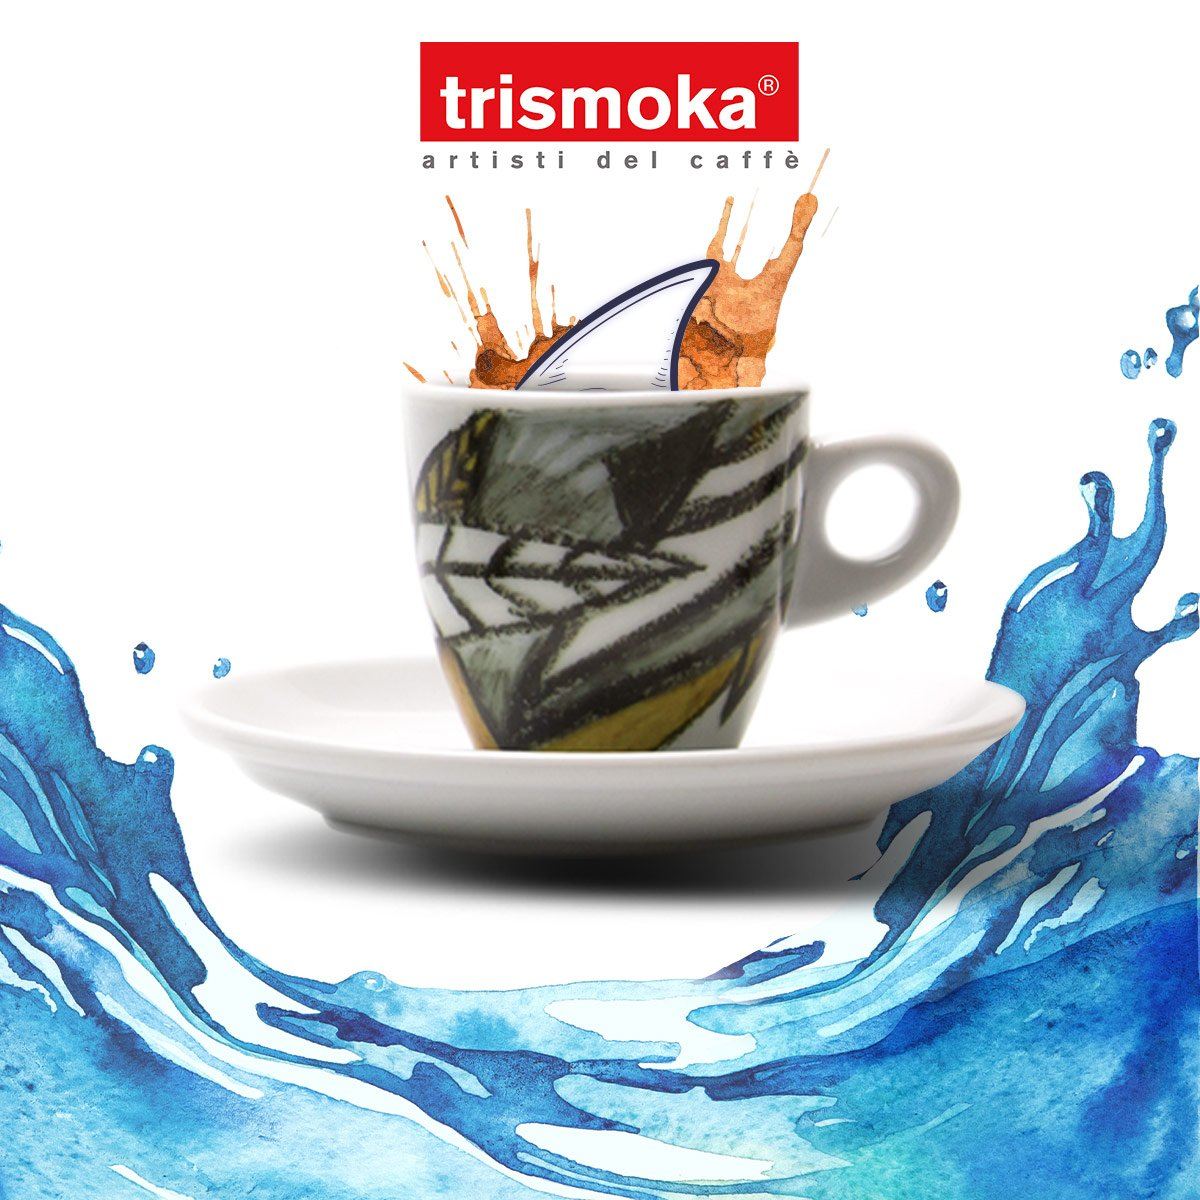 Pitti Caffe will carry Trismoka  The 60 best roasting companies in Italy in Malaysia right now.